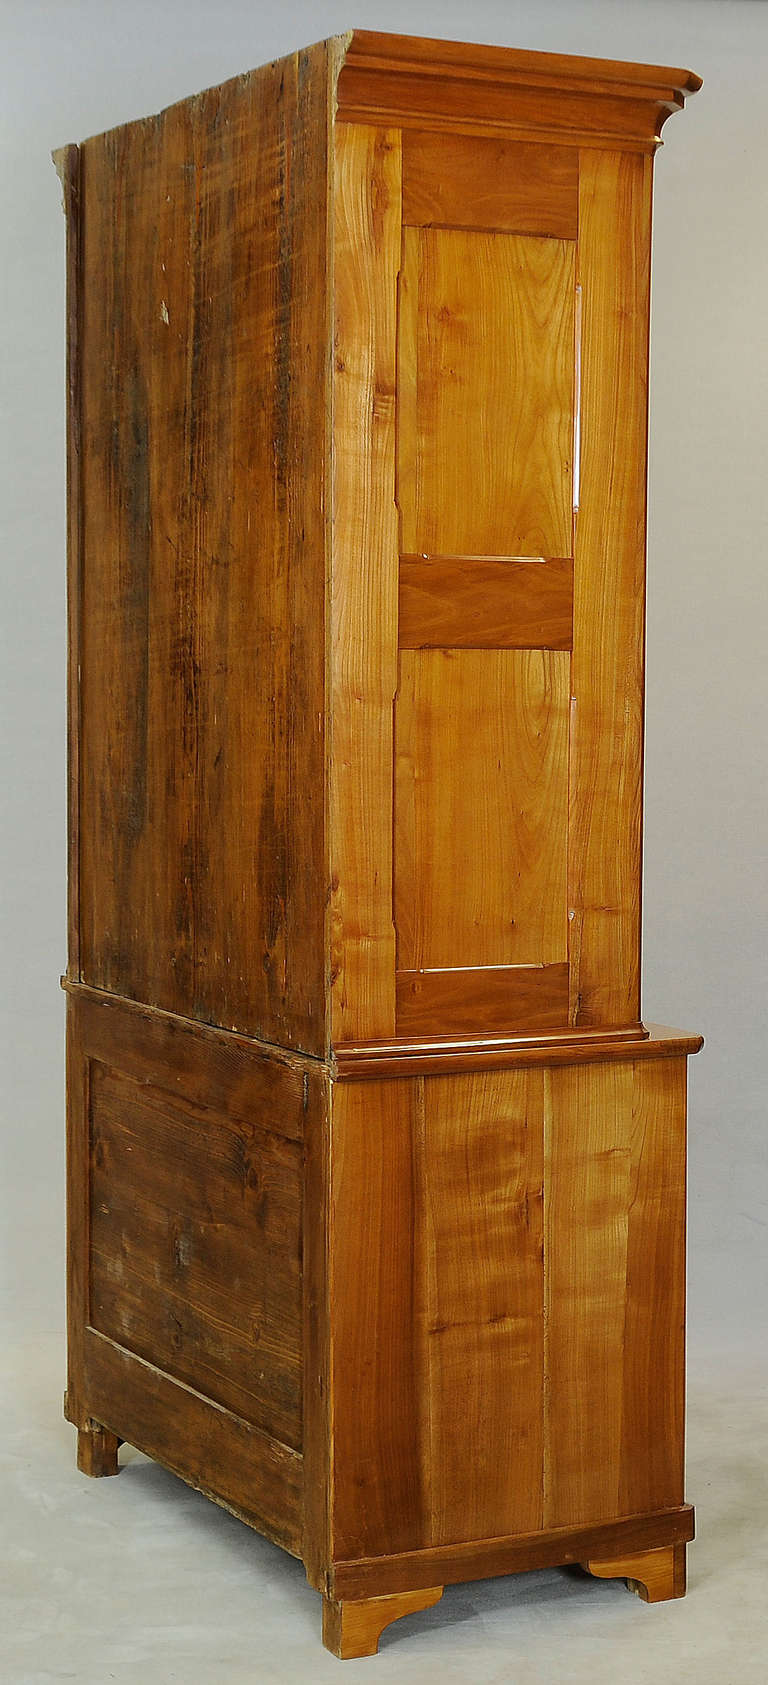 Biedermeier Chest Of Drawers With Glass Top In Cherry Wood In Excellent Condition For Sale In Senden, NRW